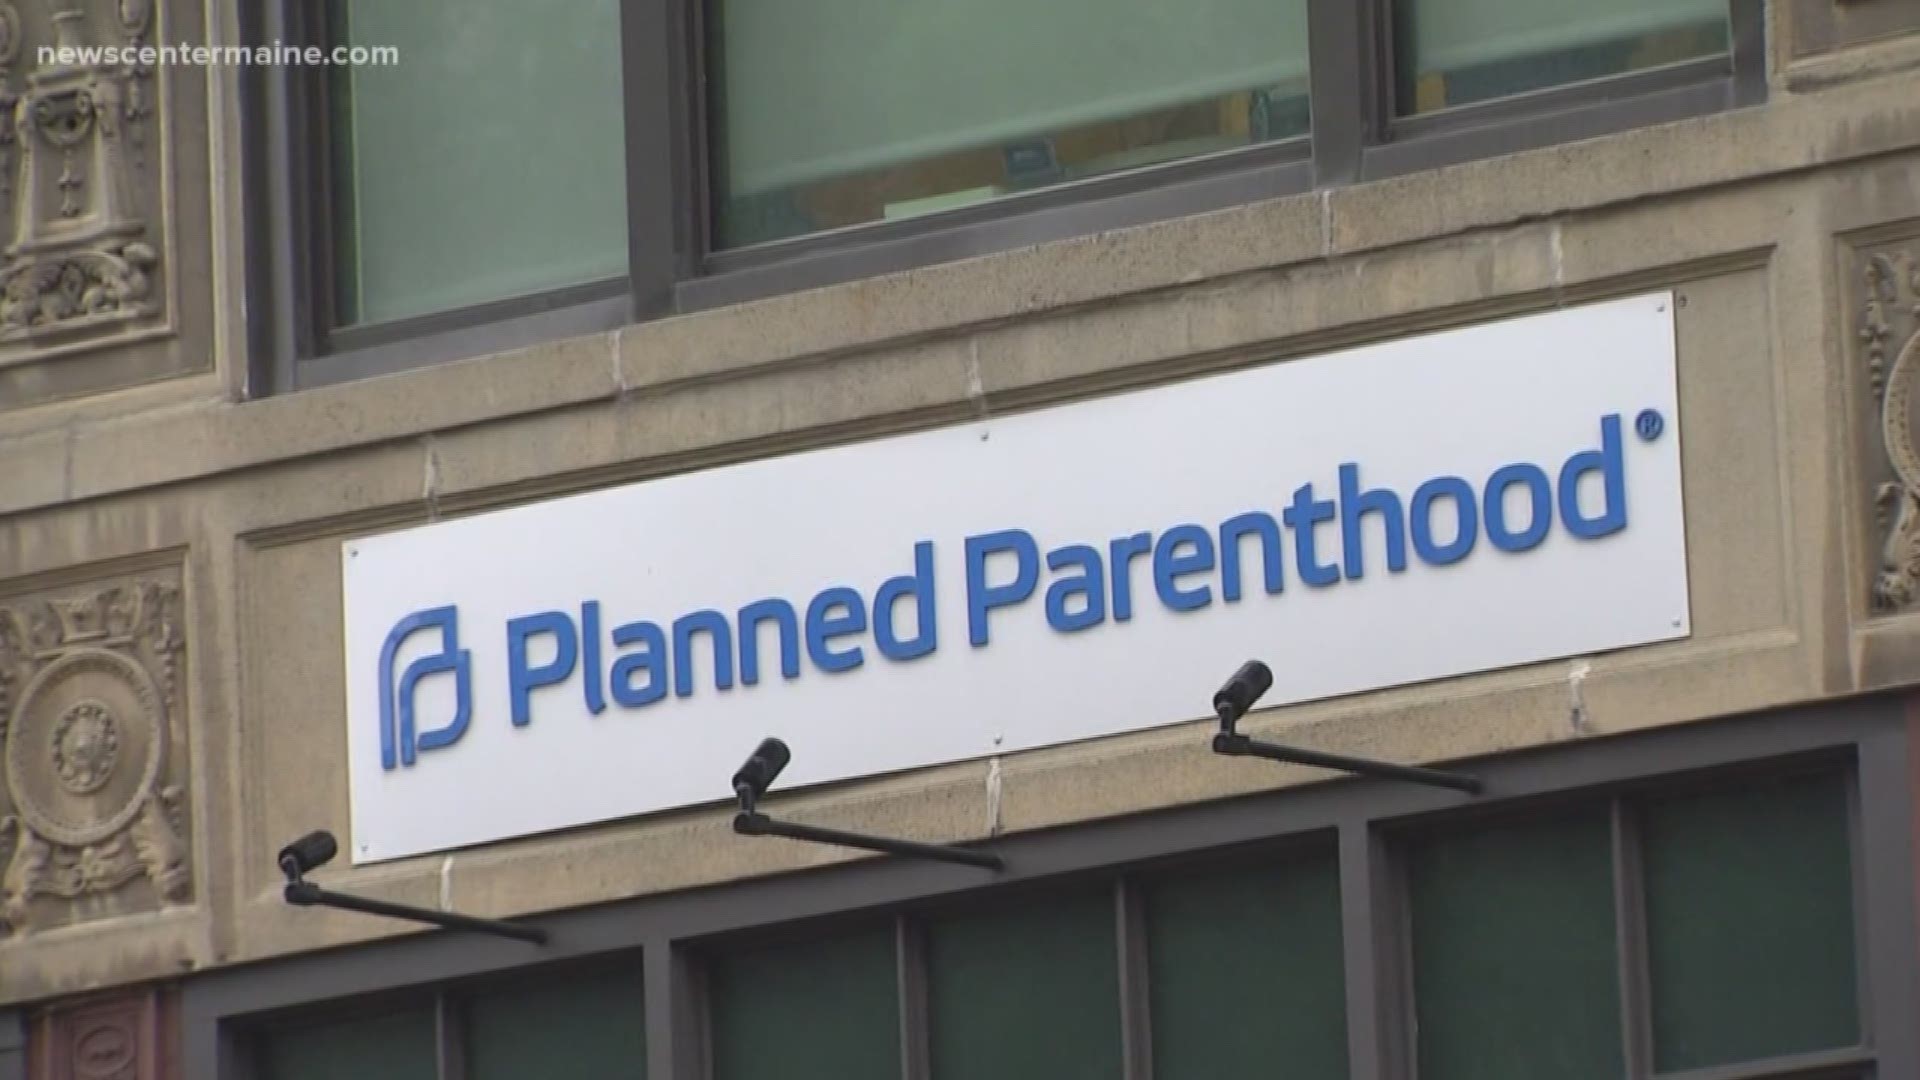 Maine reacts to Planned Parenthood decision regarding Title X